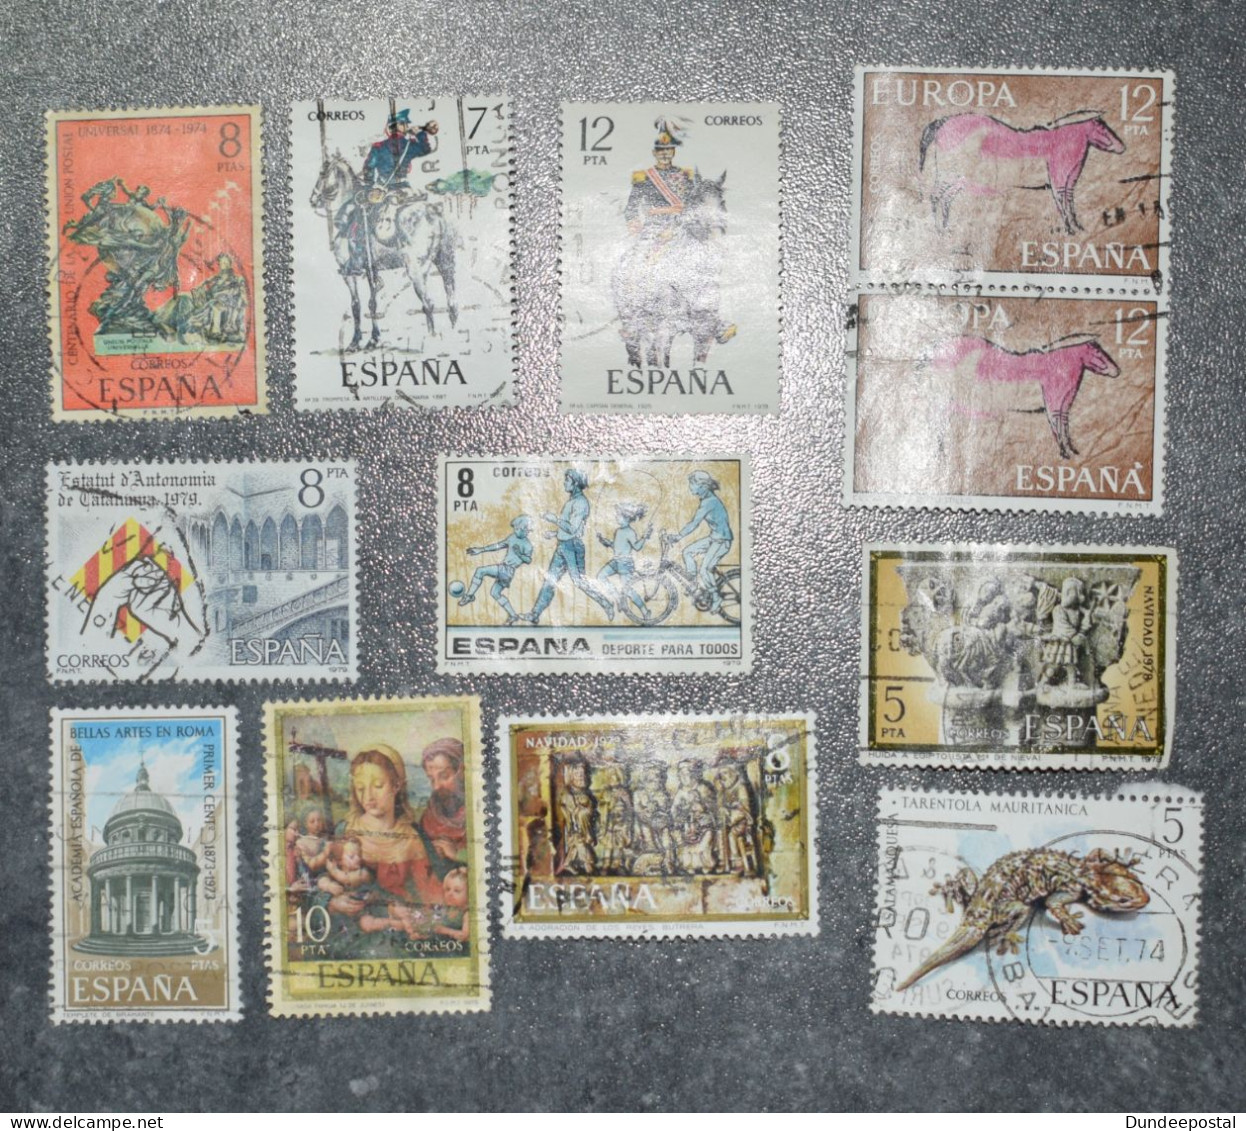 SPAIN  STAMPS Coms     1973  ~~L@@K~~ - Used Stamps